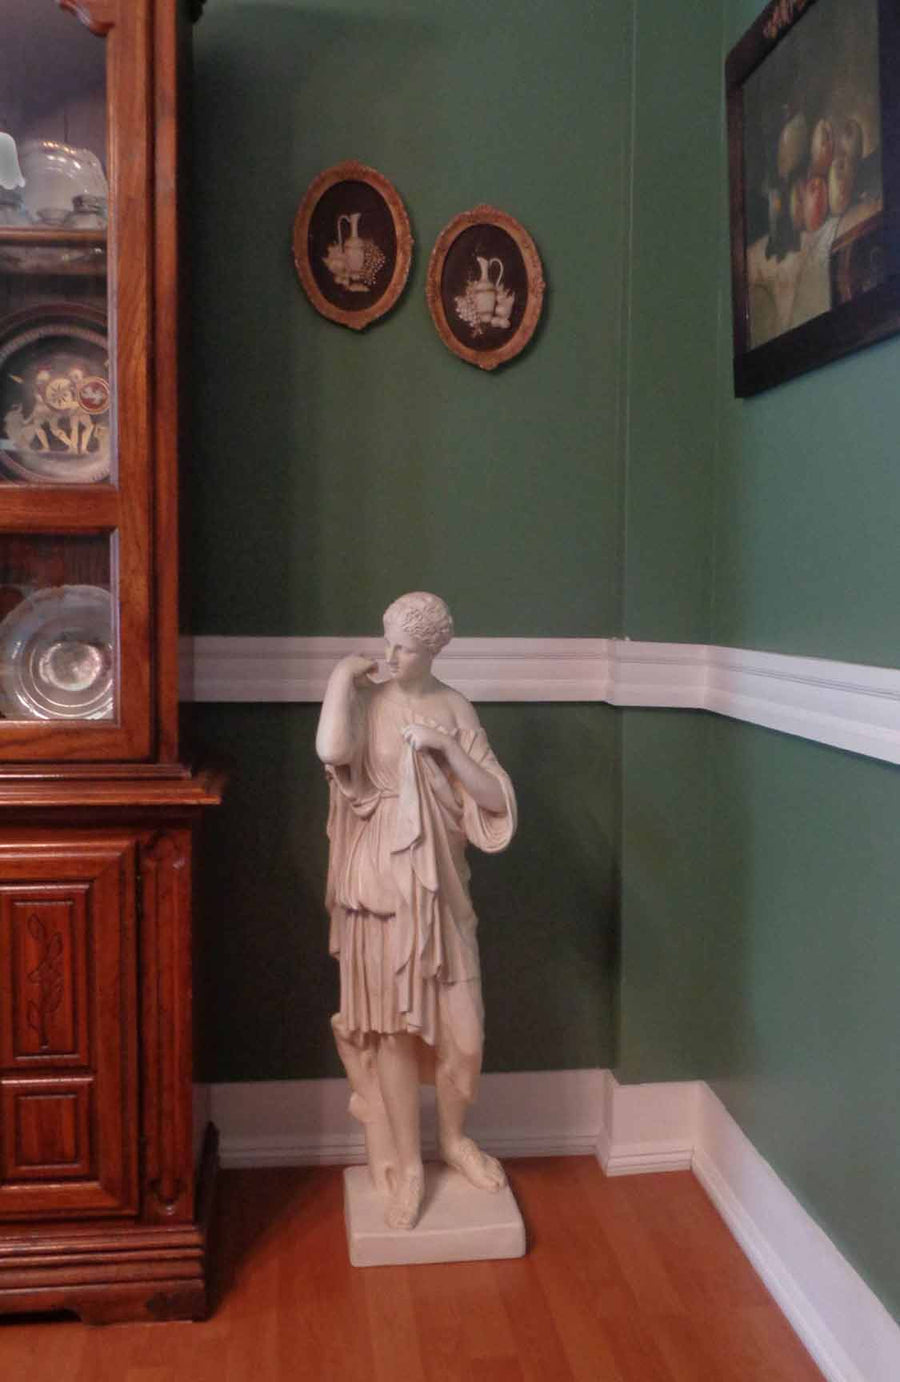 photo of plaster cast of female figure, namely the goddess Diana, with robes on a wood floor in front of a green wall with part of a hutch visible to the left and decorations in hutch and on walls